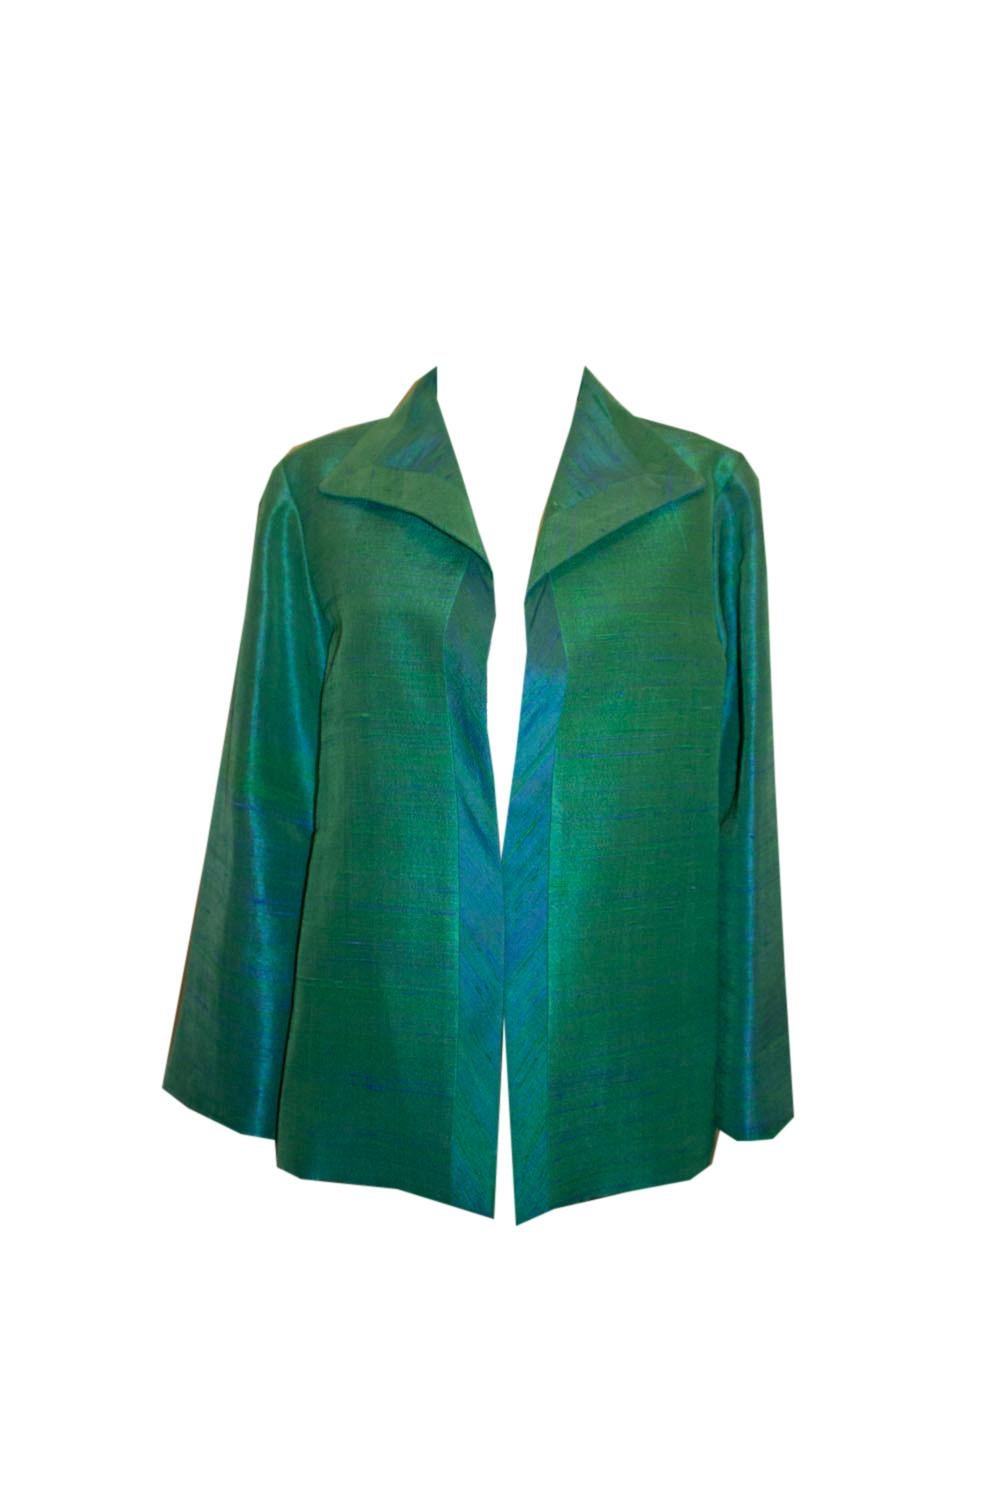 Vintage The Thai Shop Green and Blue Silk Jacket For Sale 2